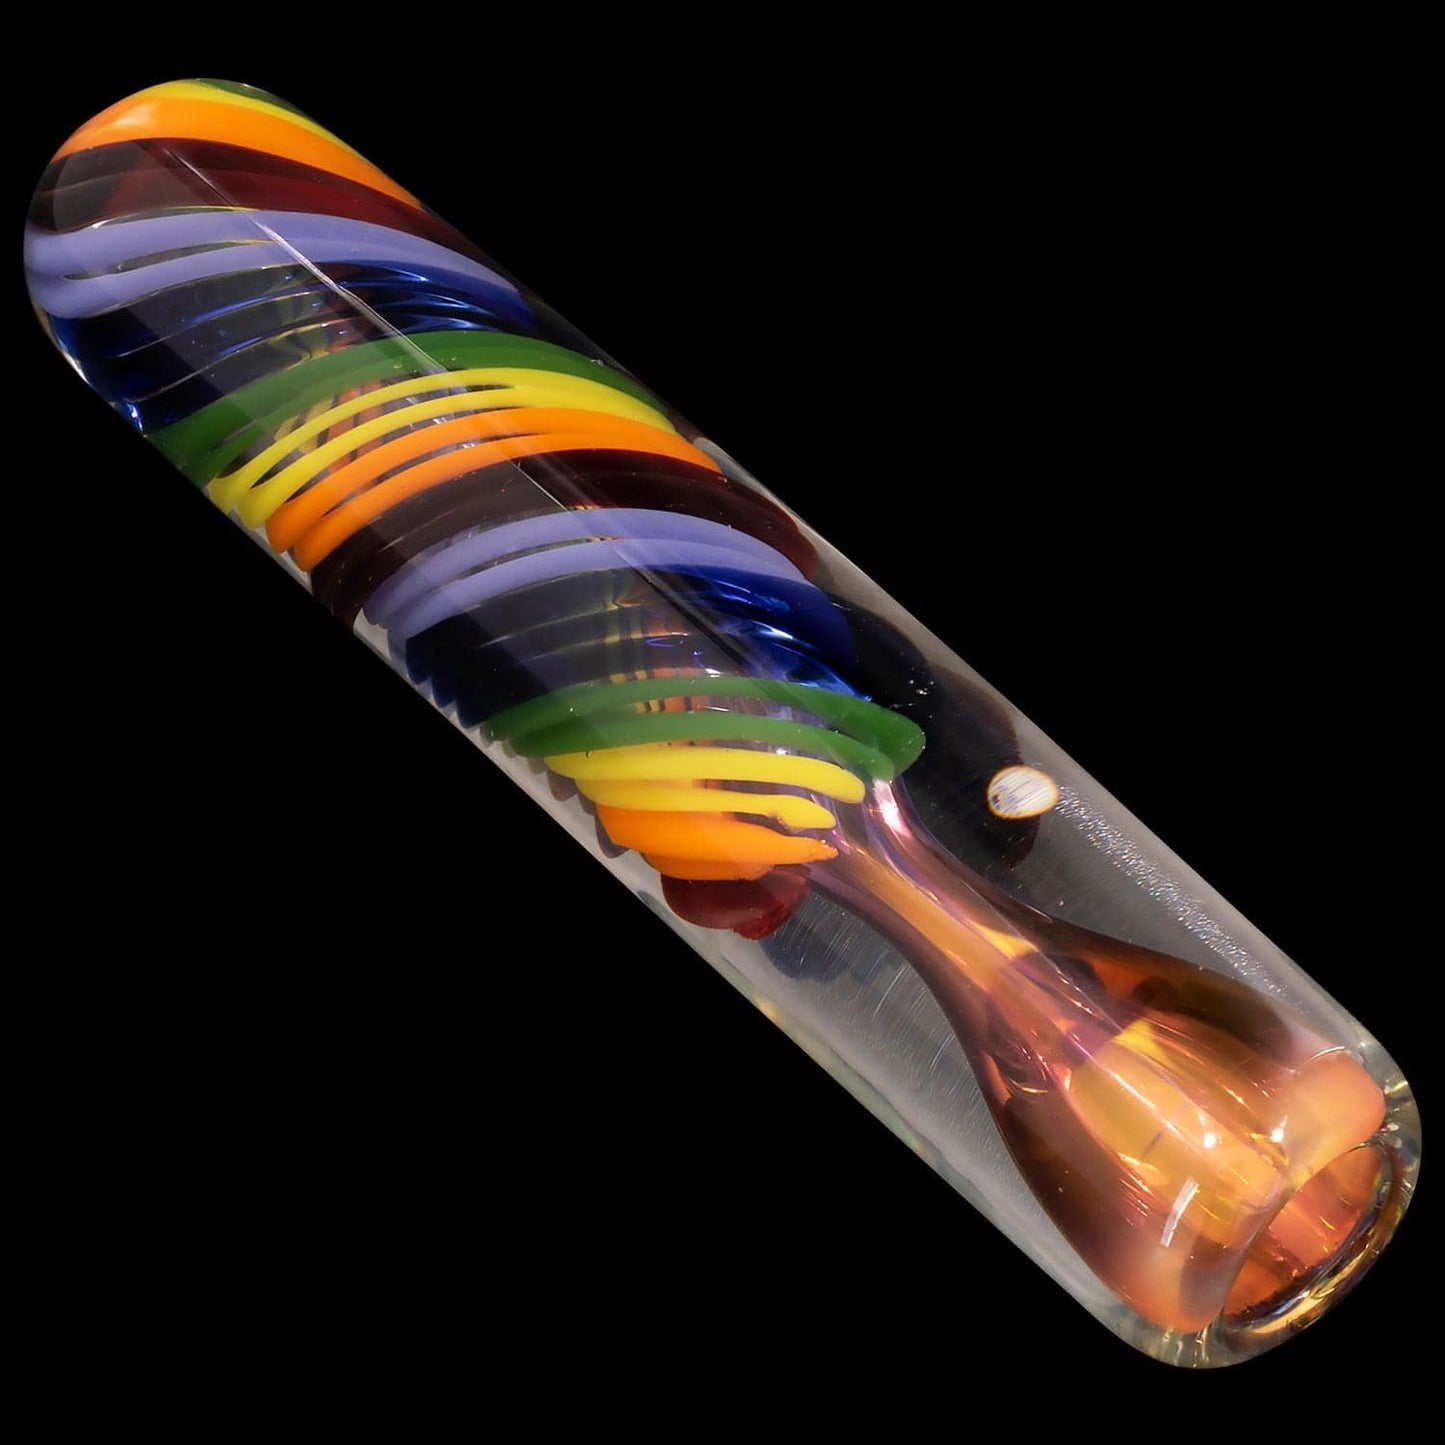 LA Pipes Hand Pipe "Twisted Rainbow" Fumed Glass Chillum